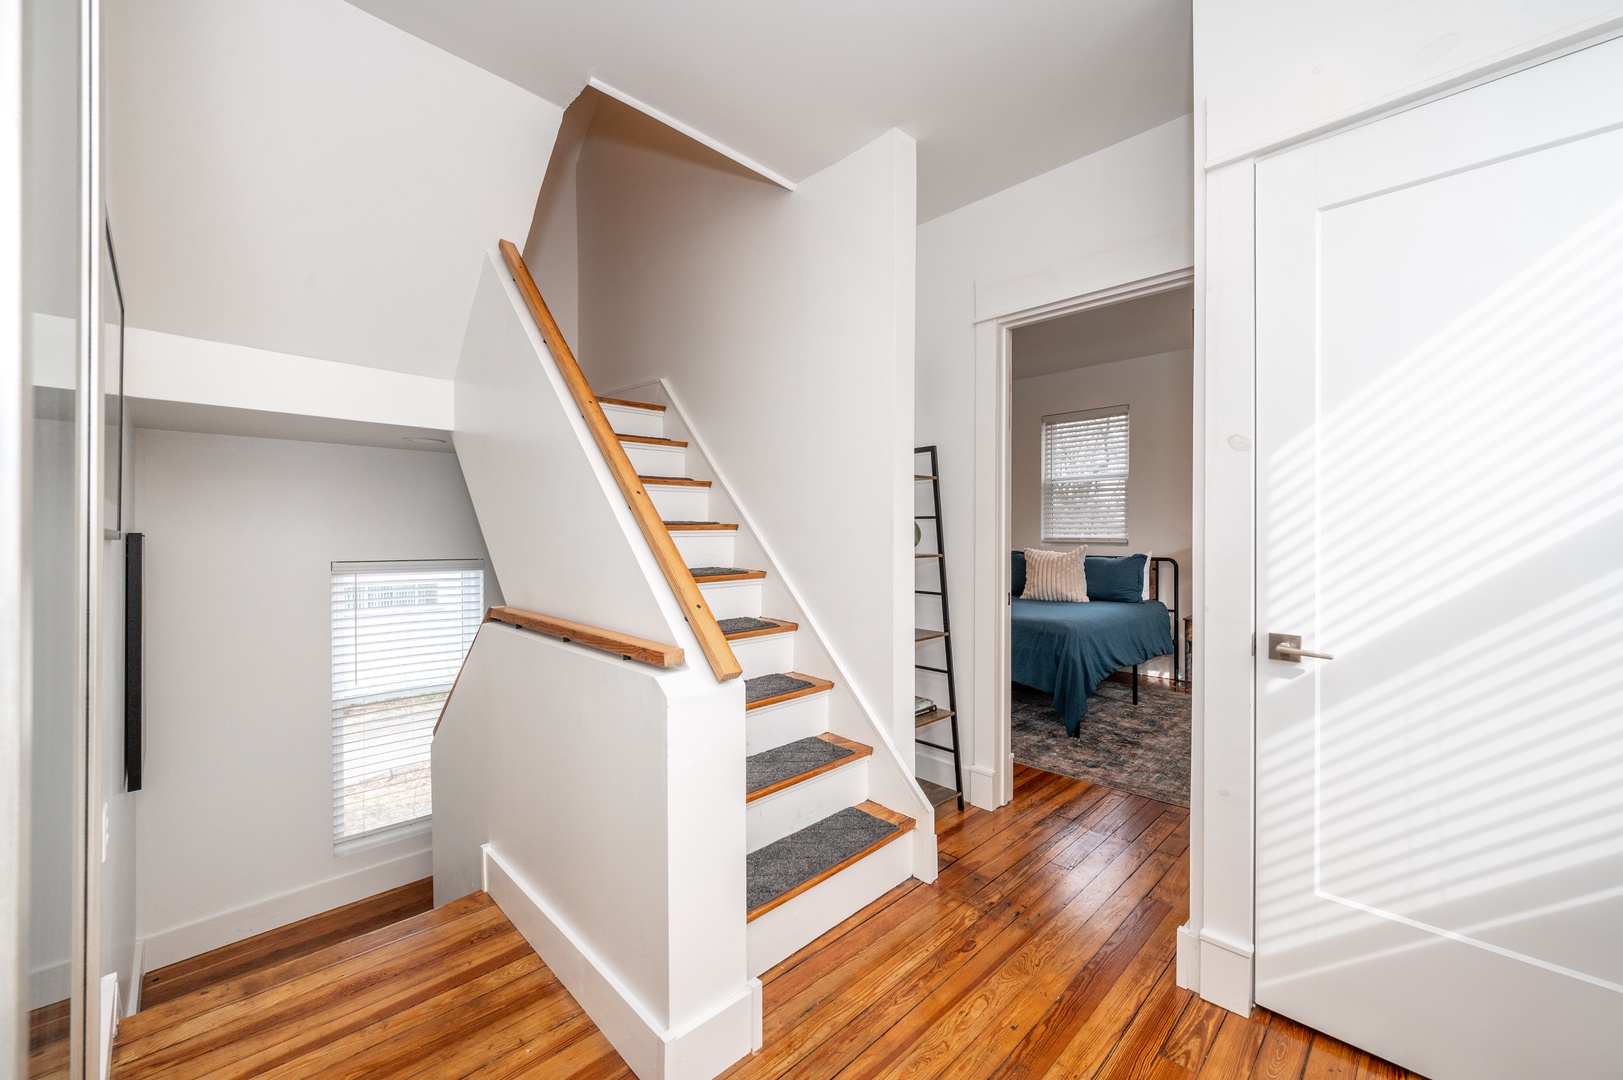 Head upstairs to the second level to find two spacious bedroom retreats